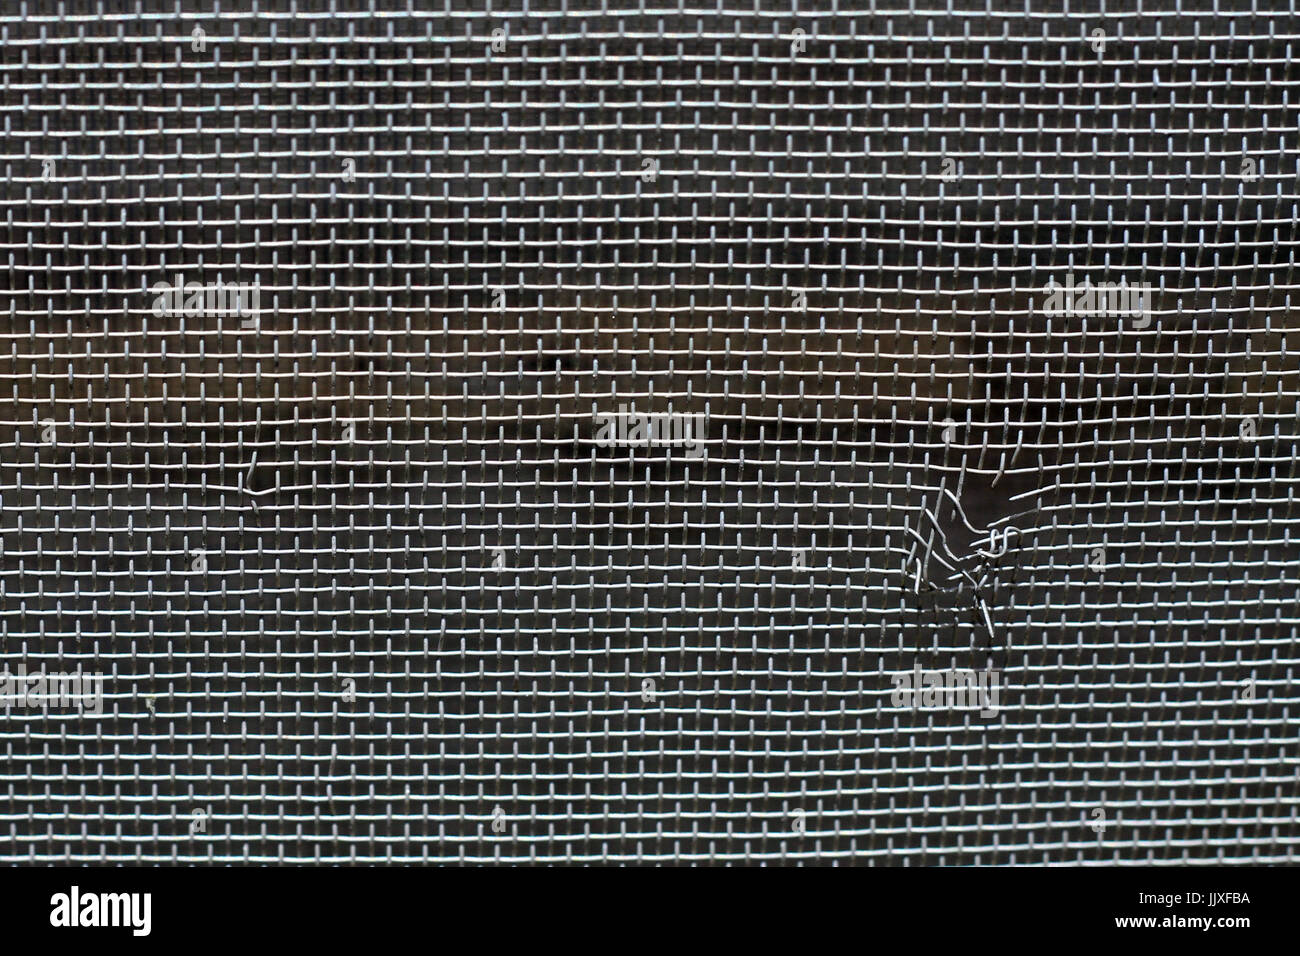 Up close detail of a window screen with a hole in it. Stock Photo